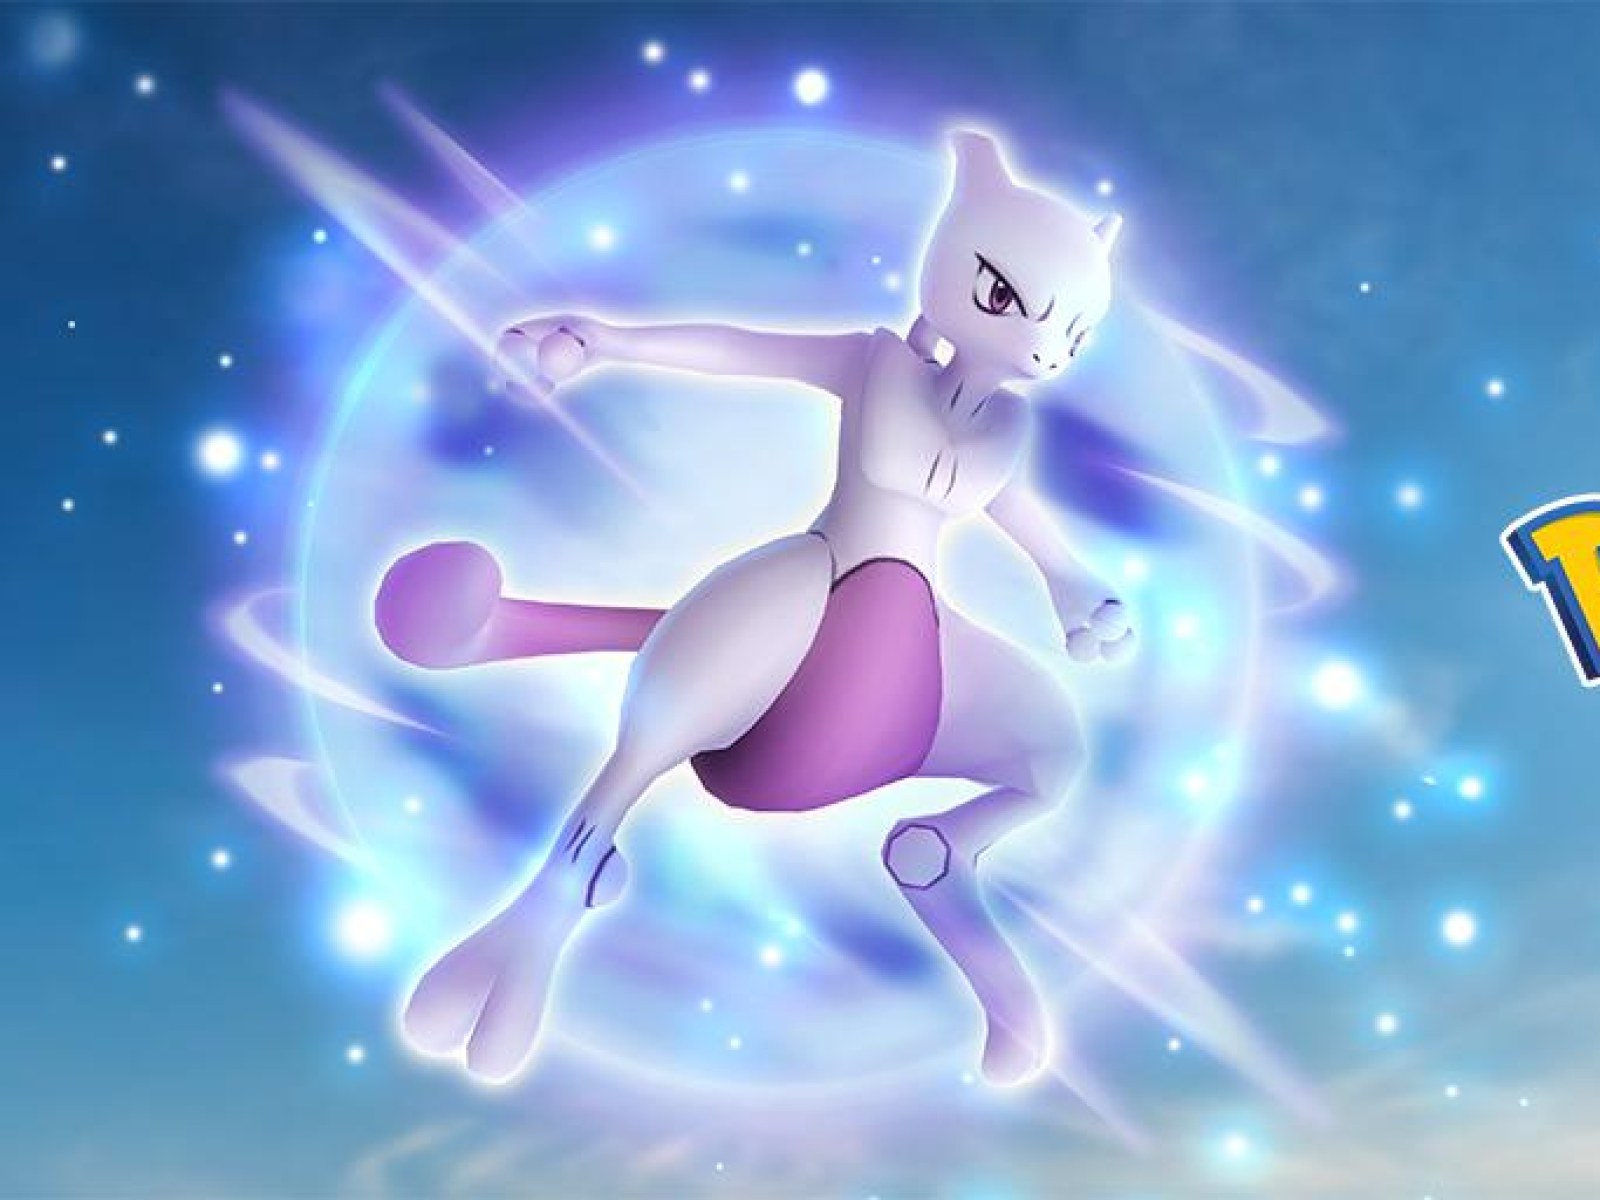 Pokémon Go' Raid Update: Shiny Mewtwo, Counters and Complete List